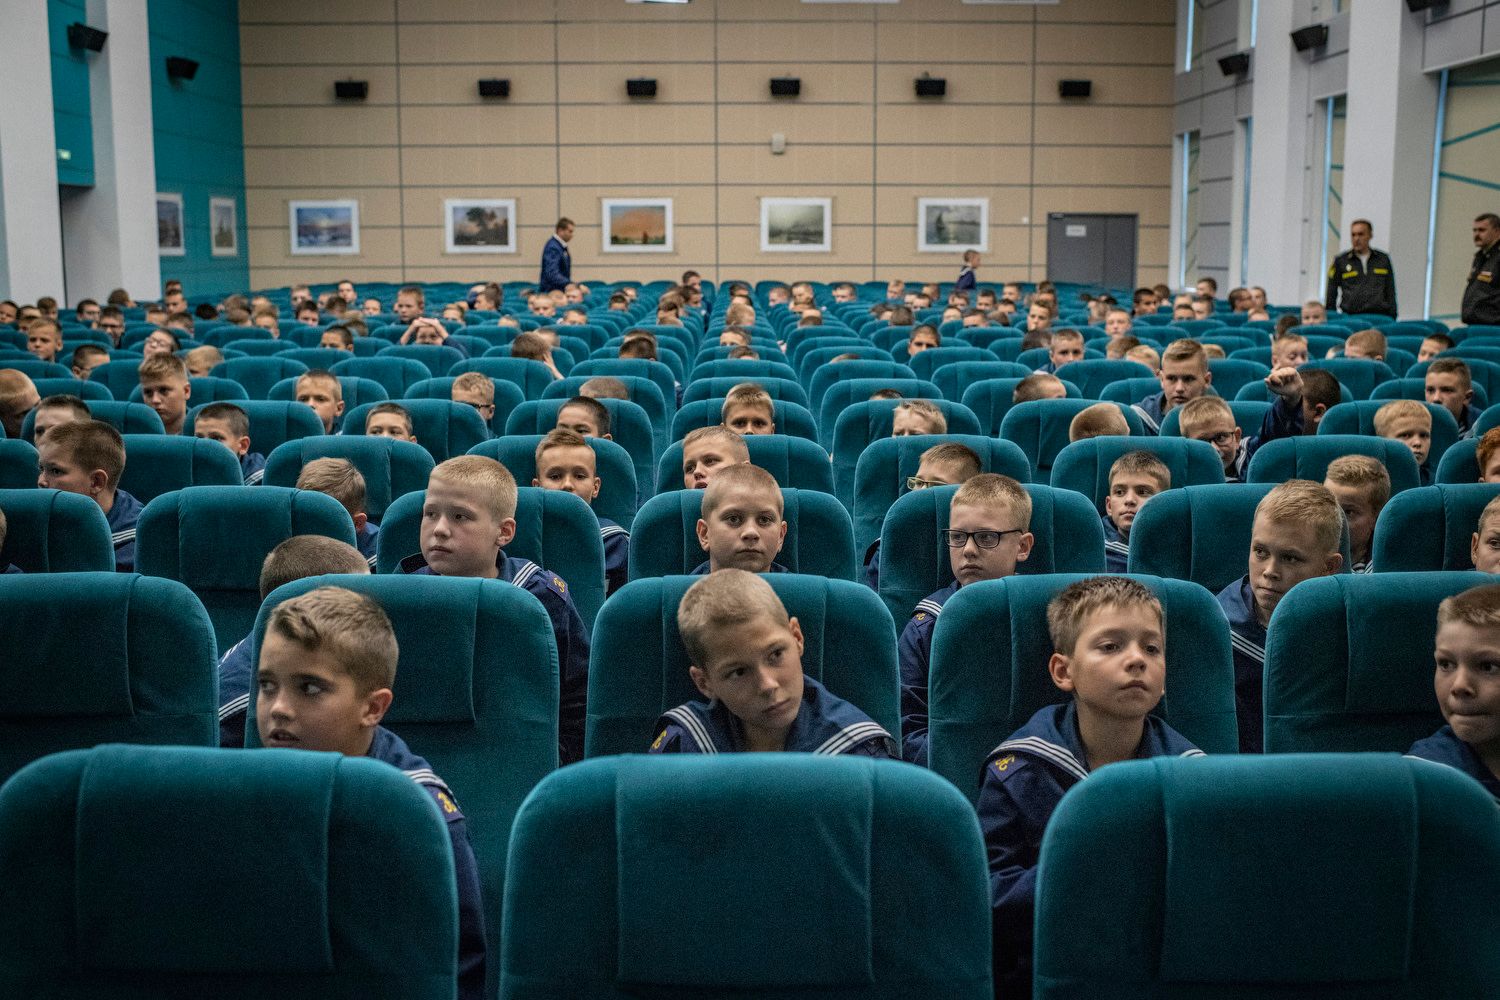 Murmansk, Murmansk Oblast, Russia, September 2018. Around 300 Cadets attend this school, named after the legendary admiral Pavel Nakhimov (1802-55), shot by a sniper at the Siege of Sevastopol. Over the last five years, eight other Nakhimov schools have been established countrywide under the decision of President Putin, who pays great attention to the patriotic education of the new generation.